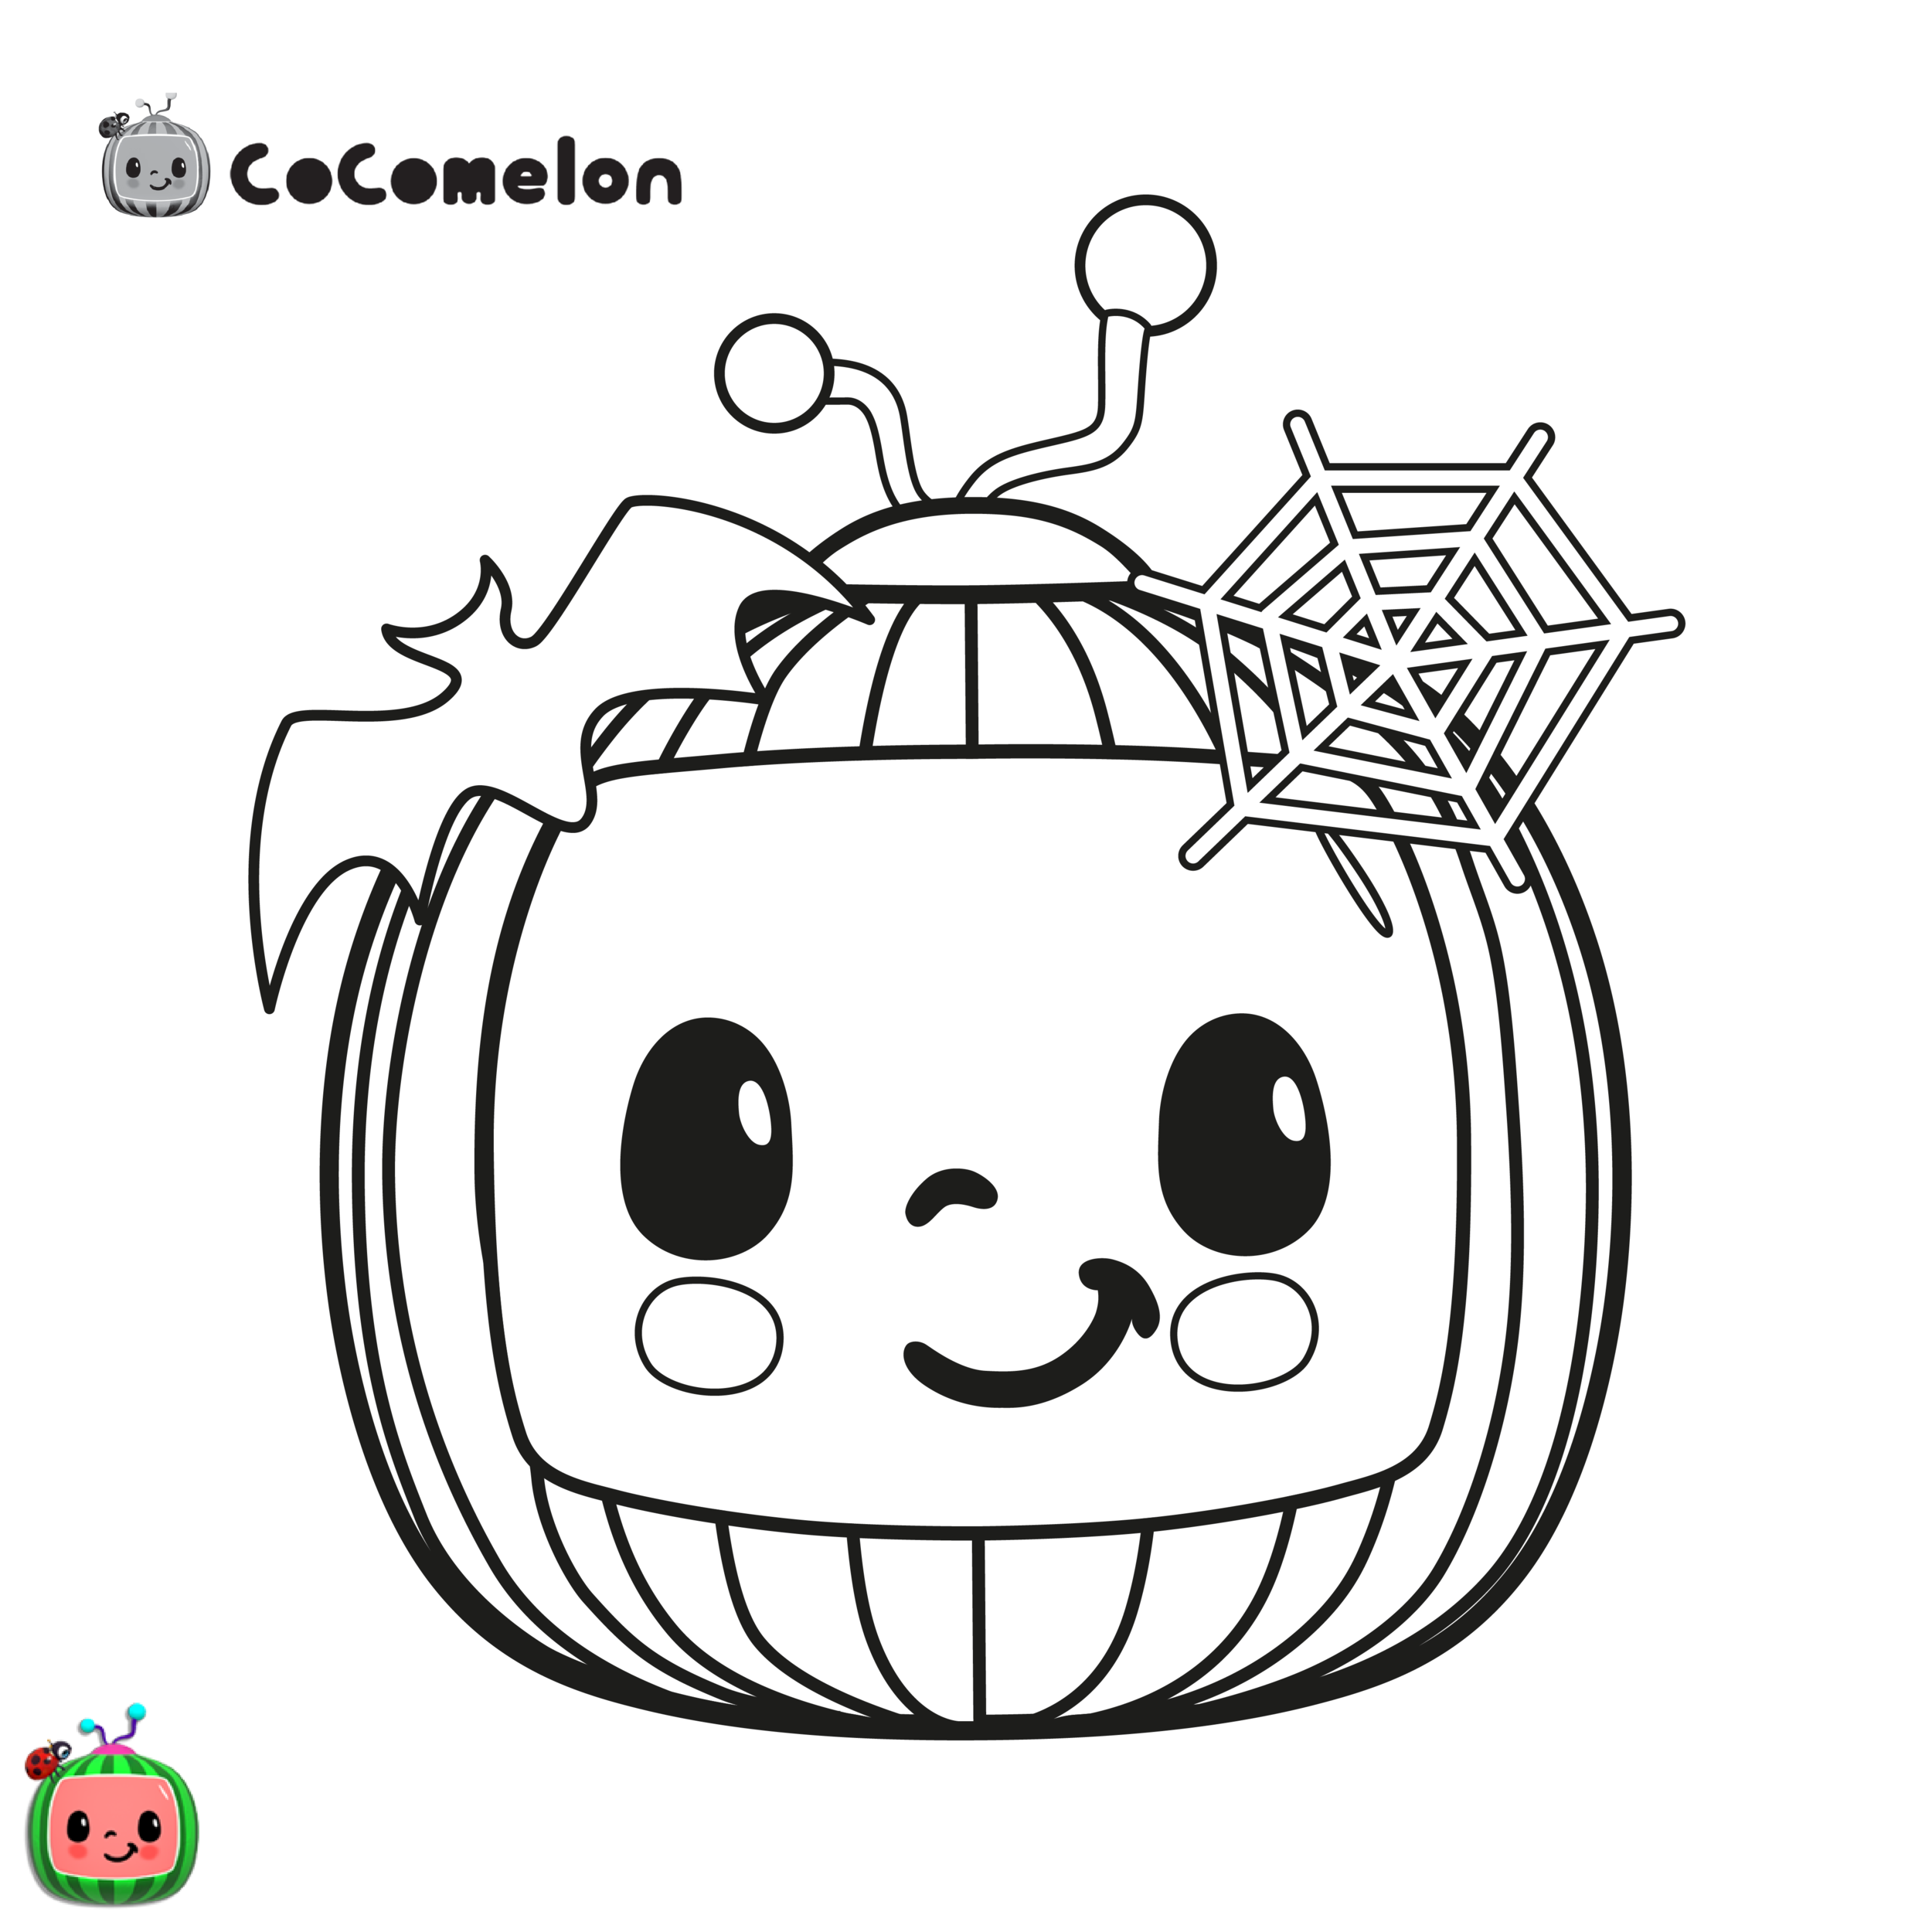 Cocomelon Coloring Pages Free